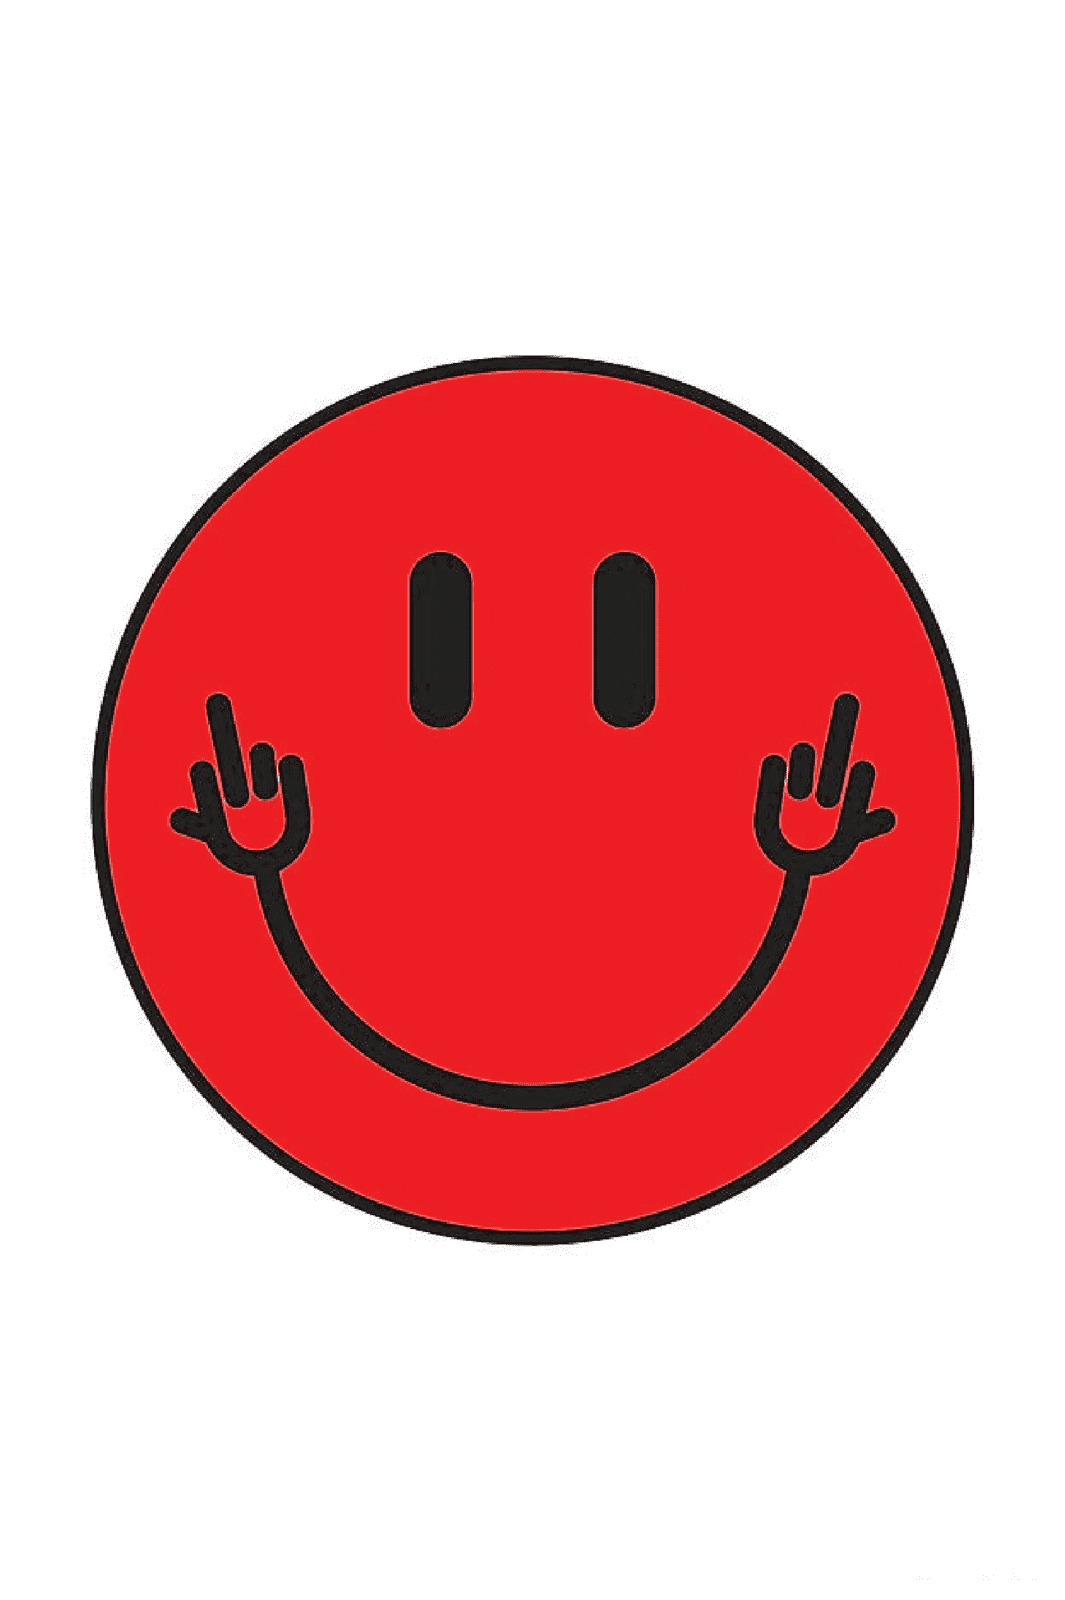 SMILEY POSTER IN MULTIPLE COLORS - PosterFi